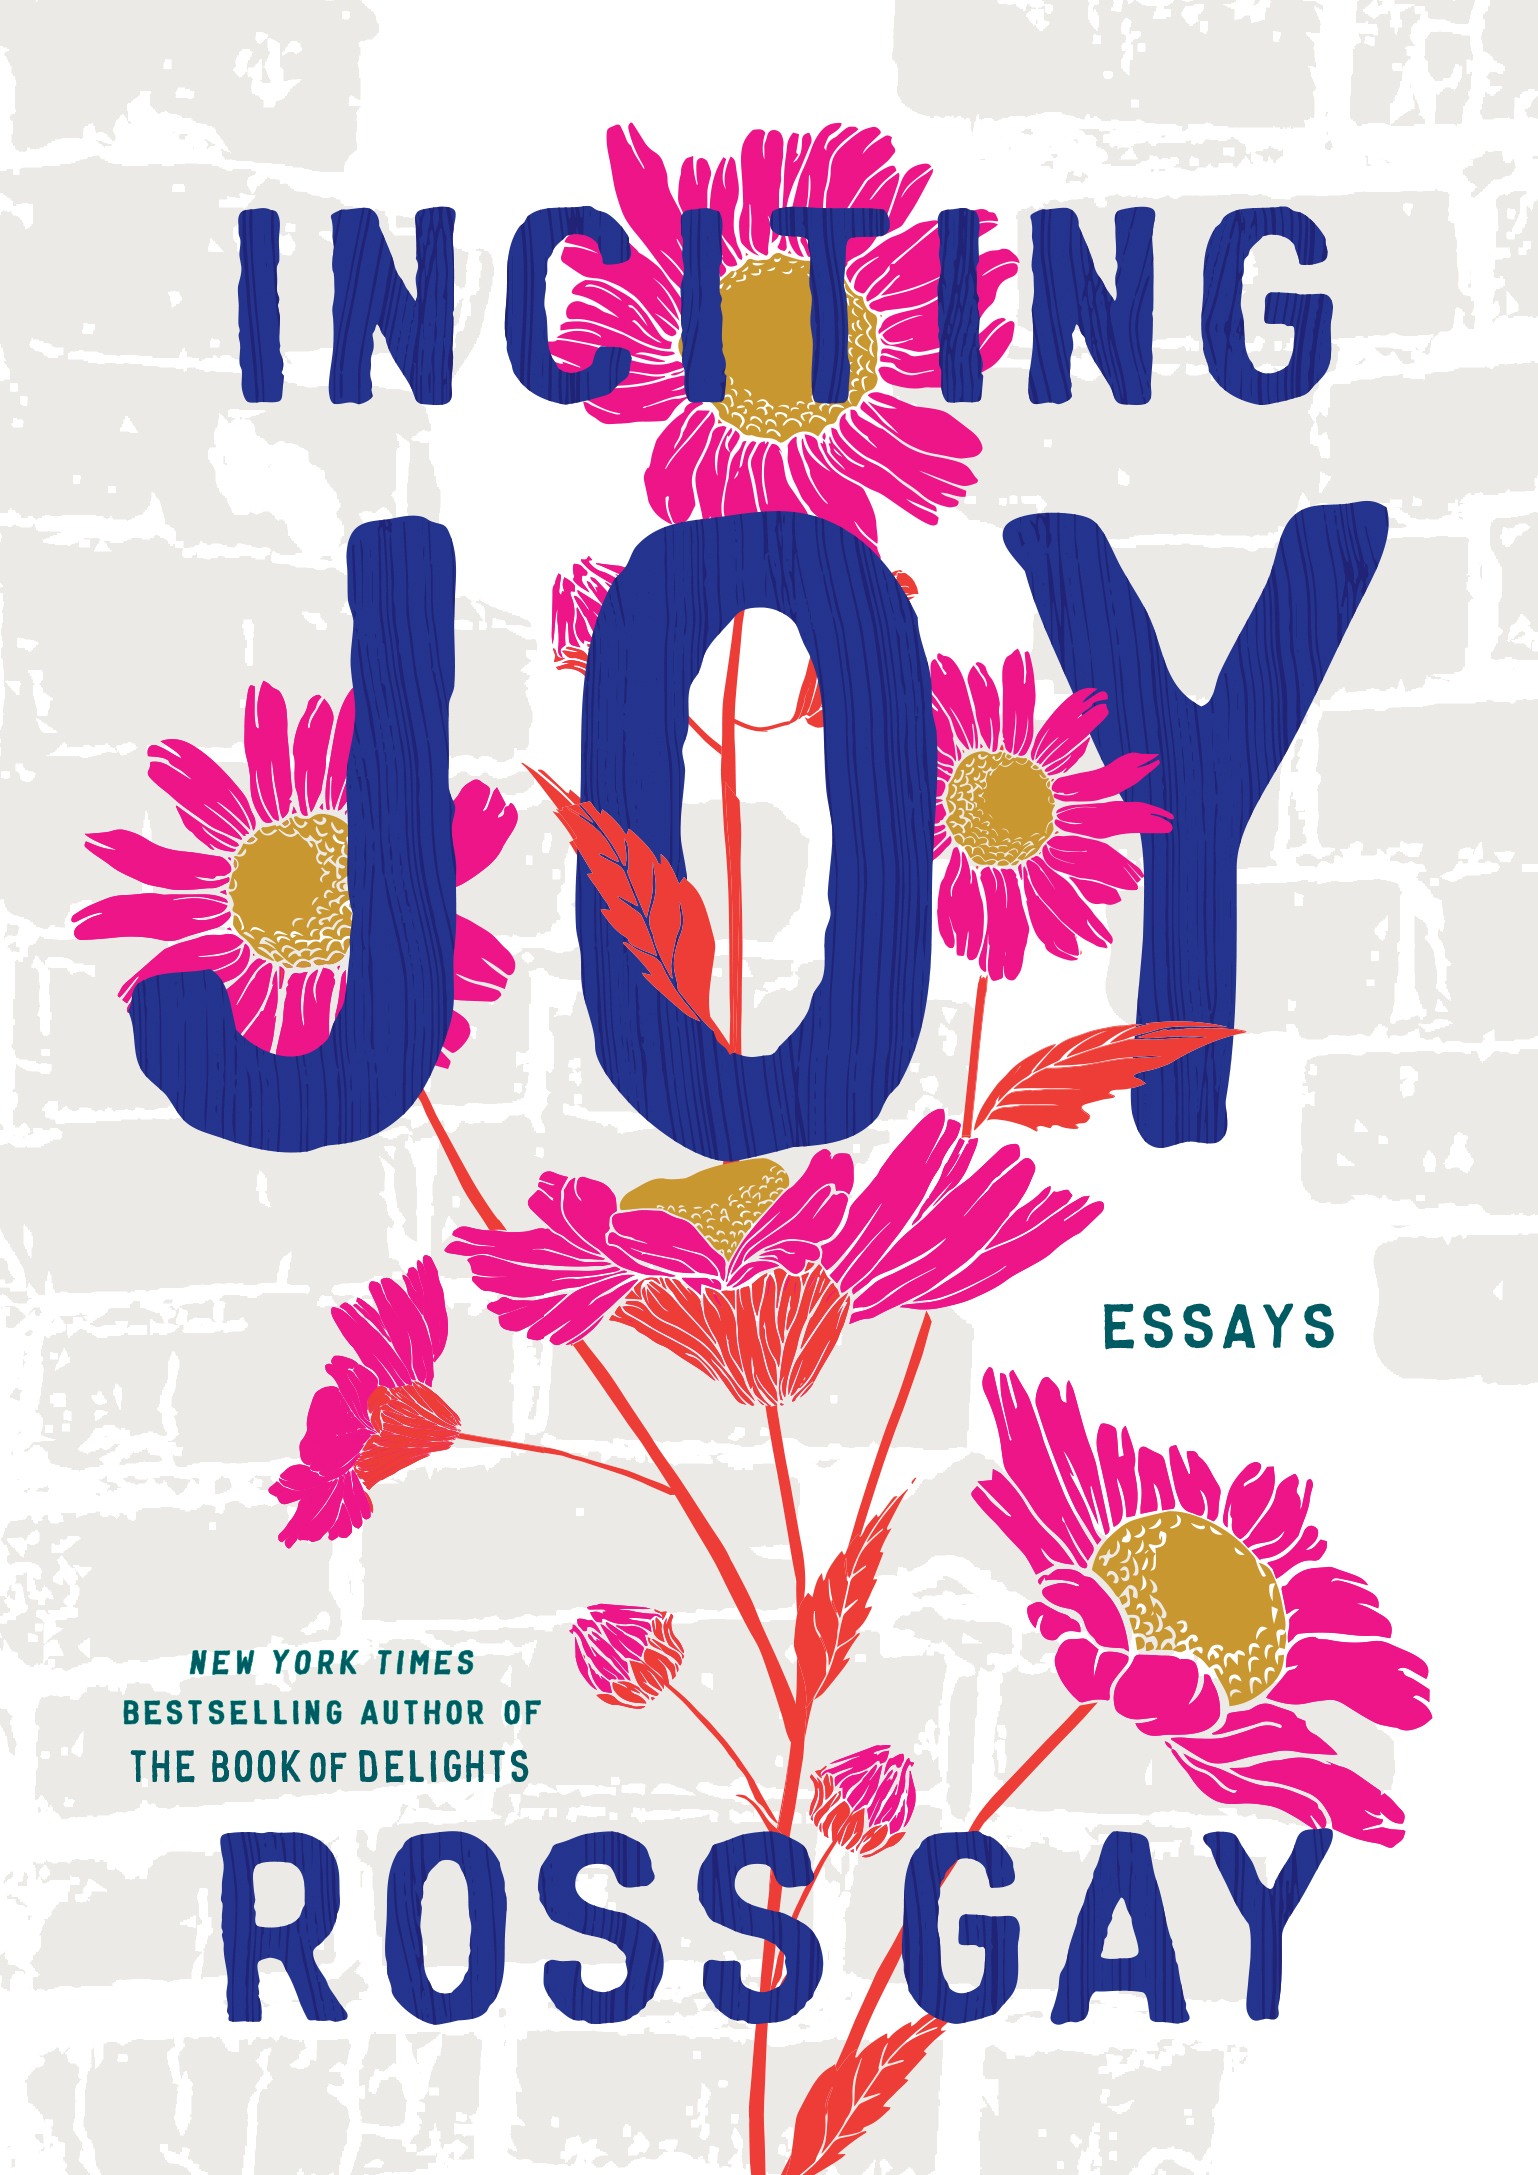 Inciting Joy book cover by Ross Gay